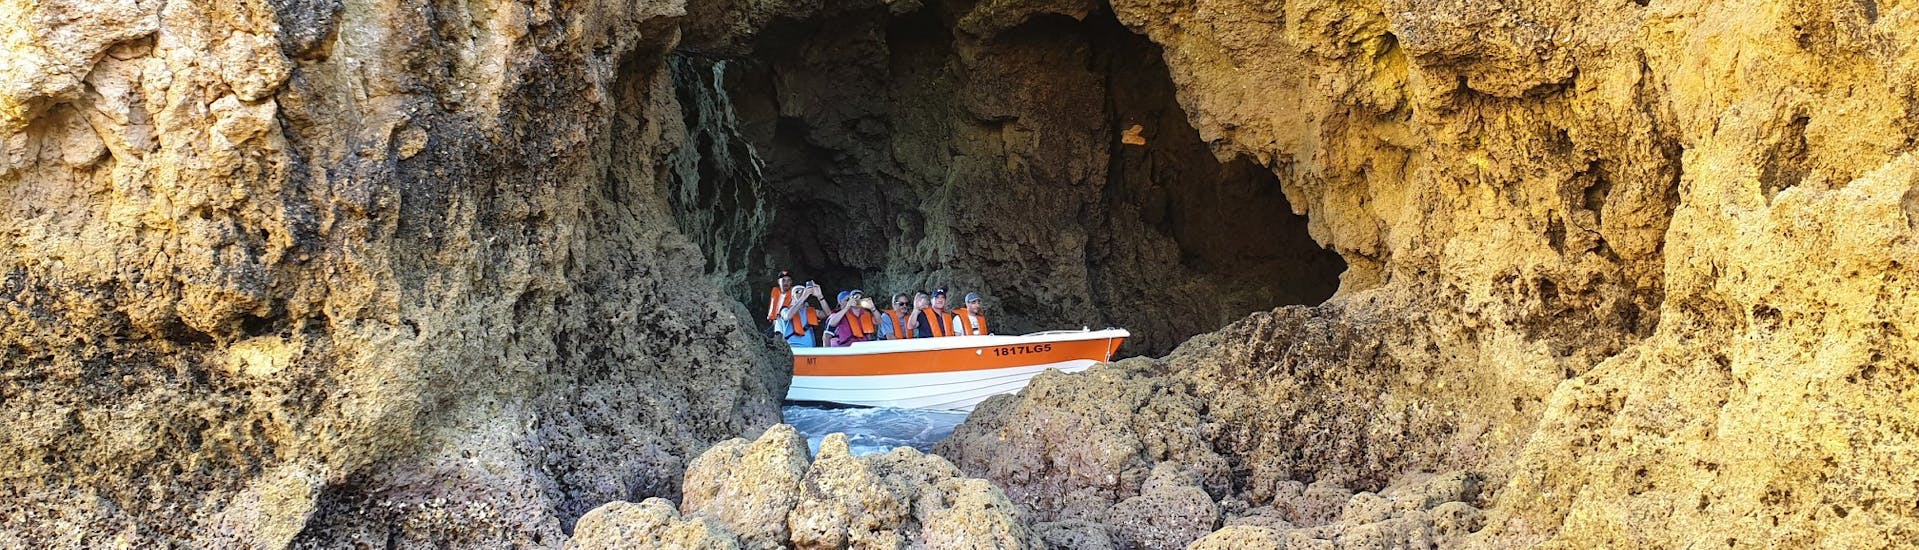 The small boat in a cave during the Private Boat Trip to the Caves of Ponta da Piedade.